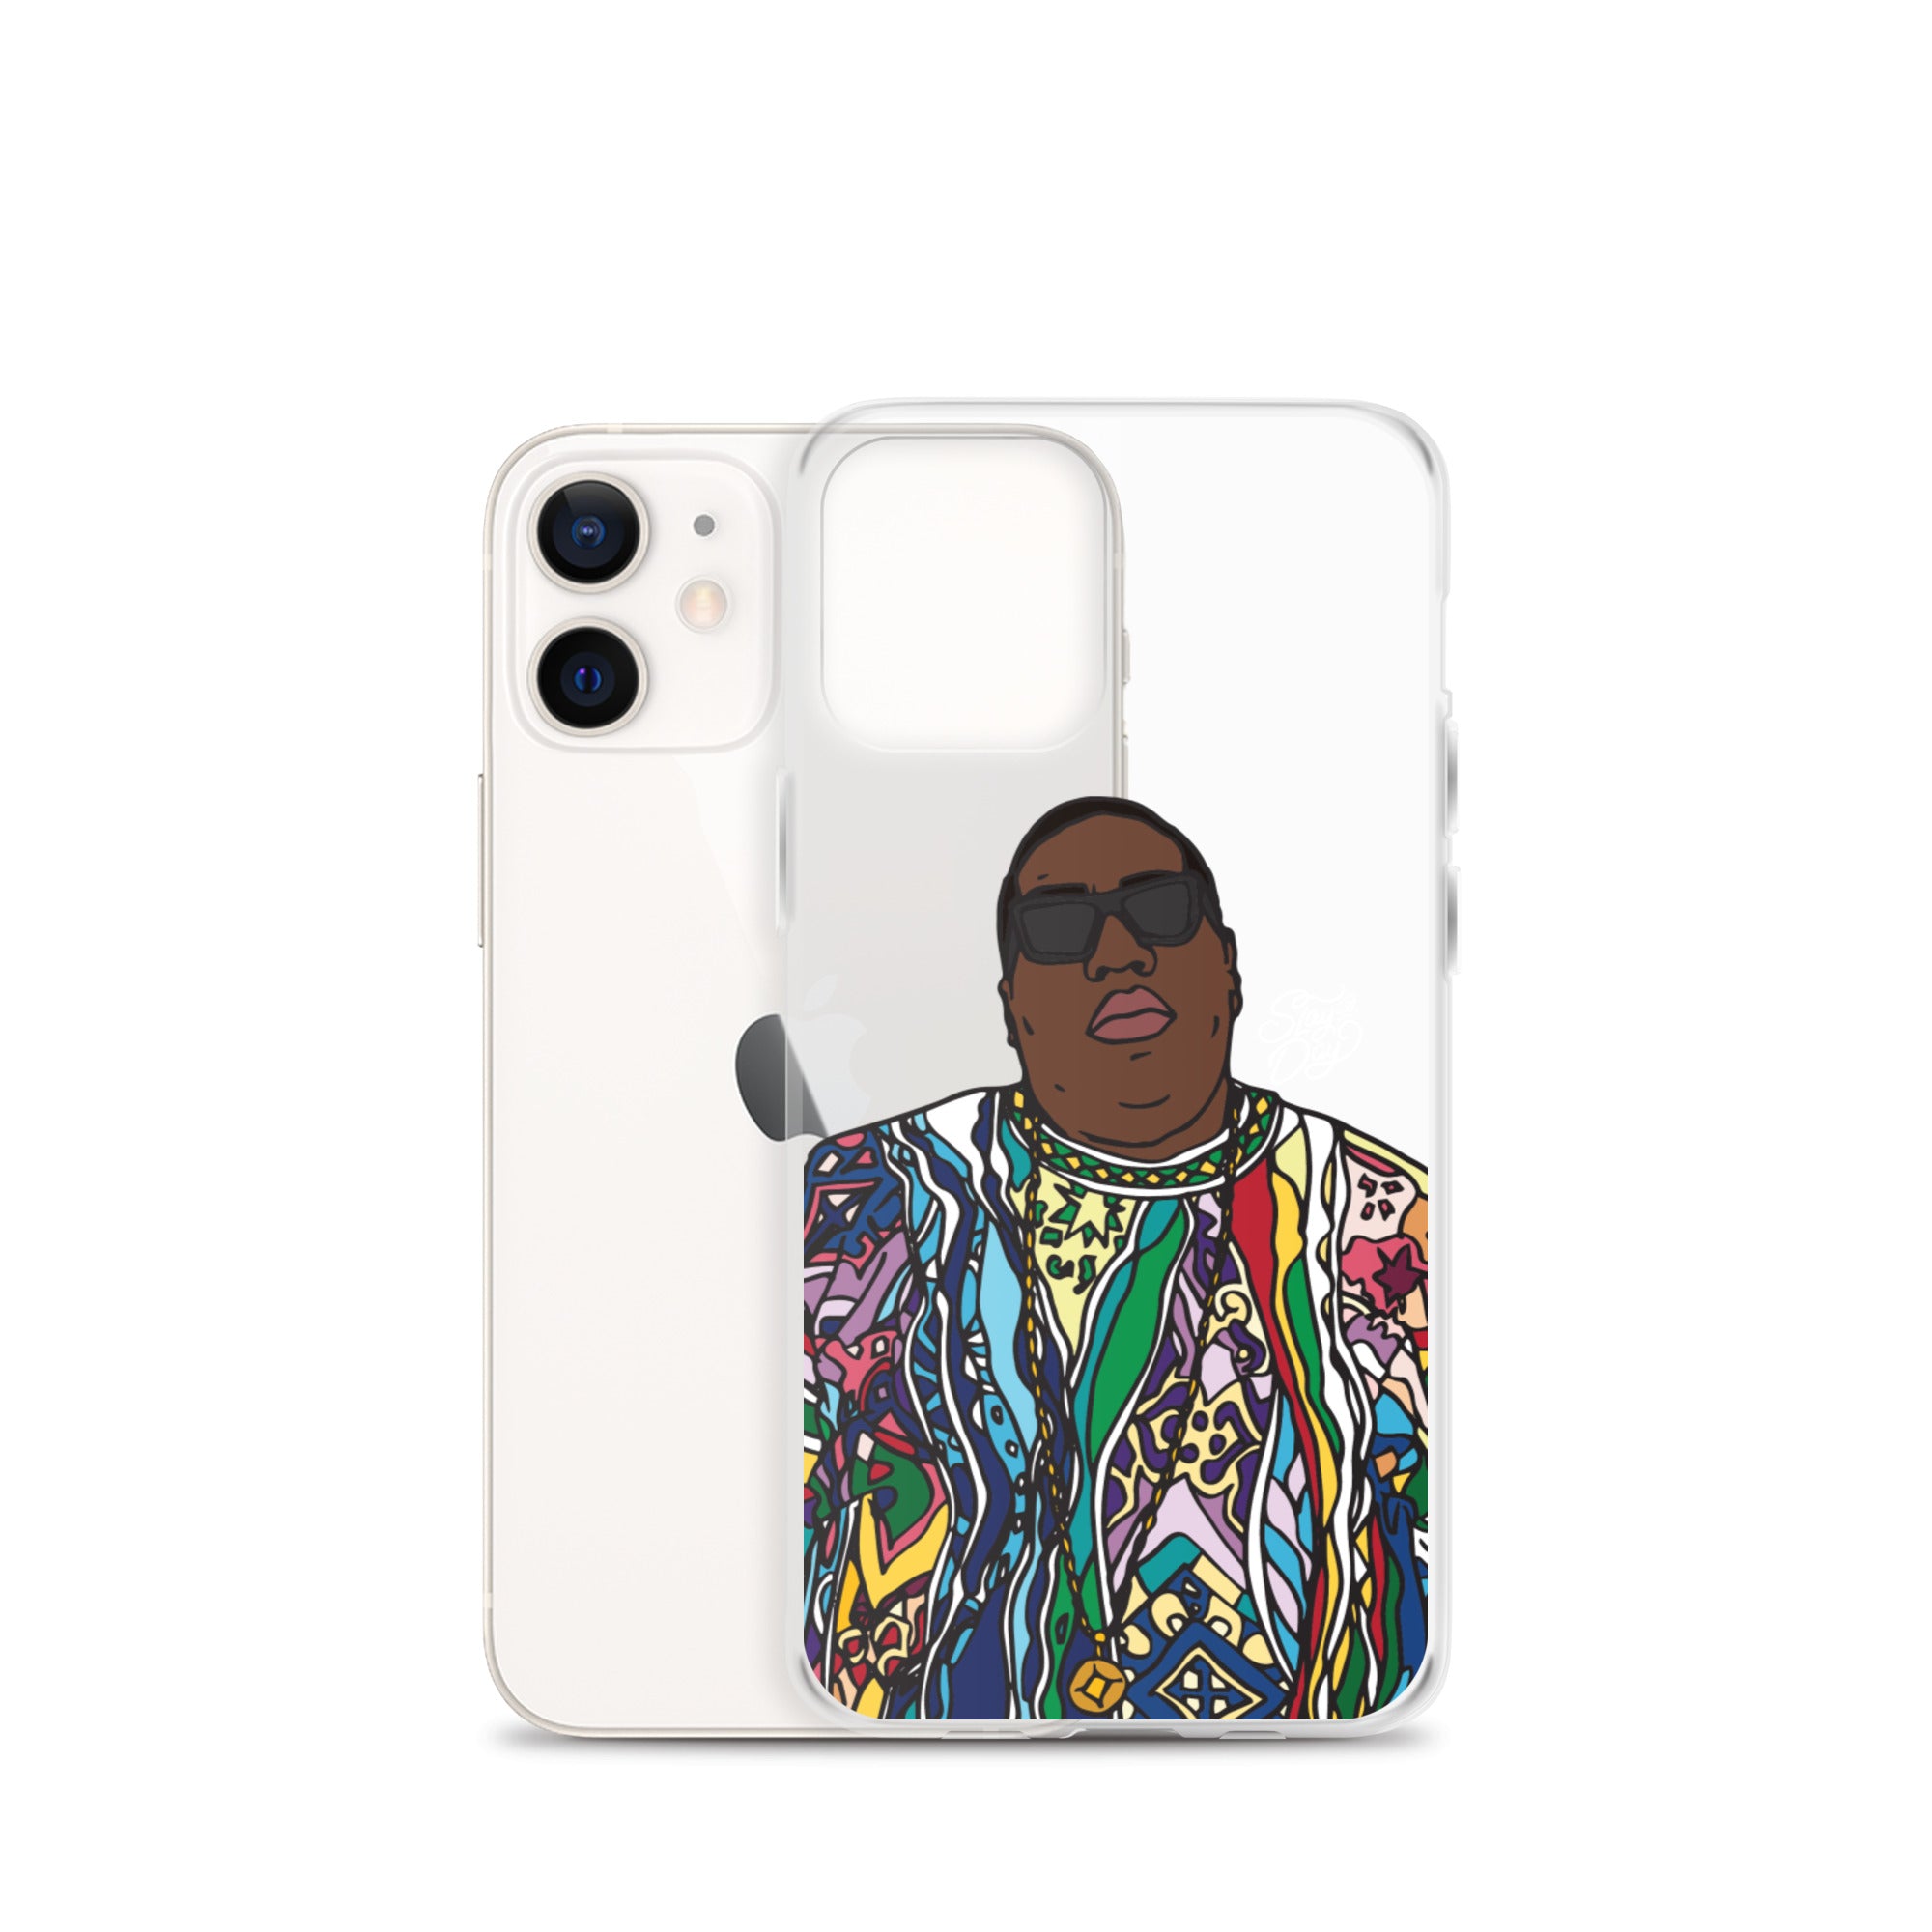 Notorious B.I.G. - iPhone Case